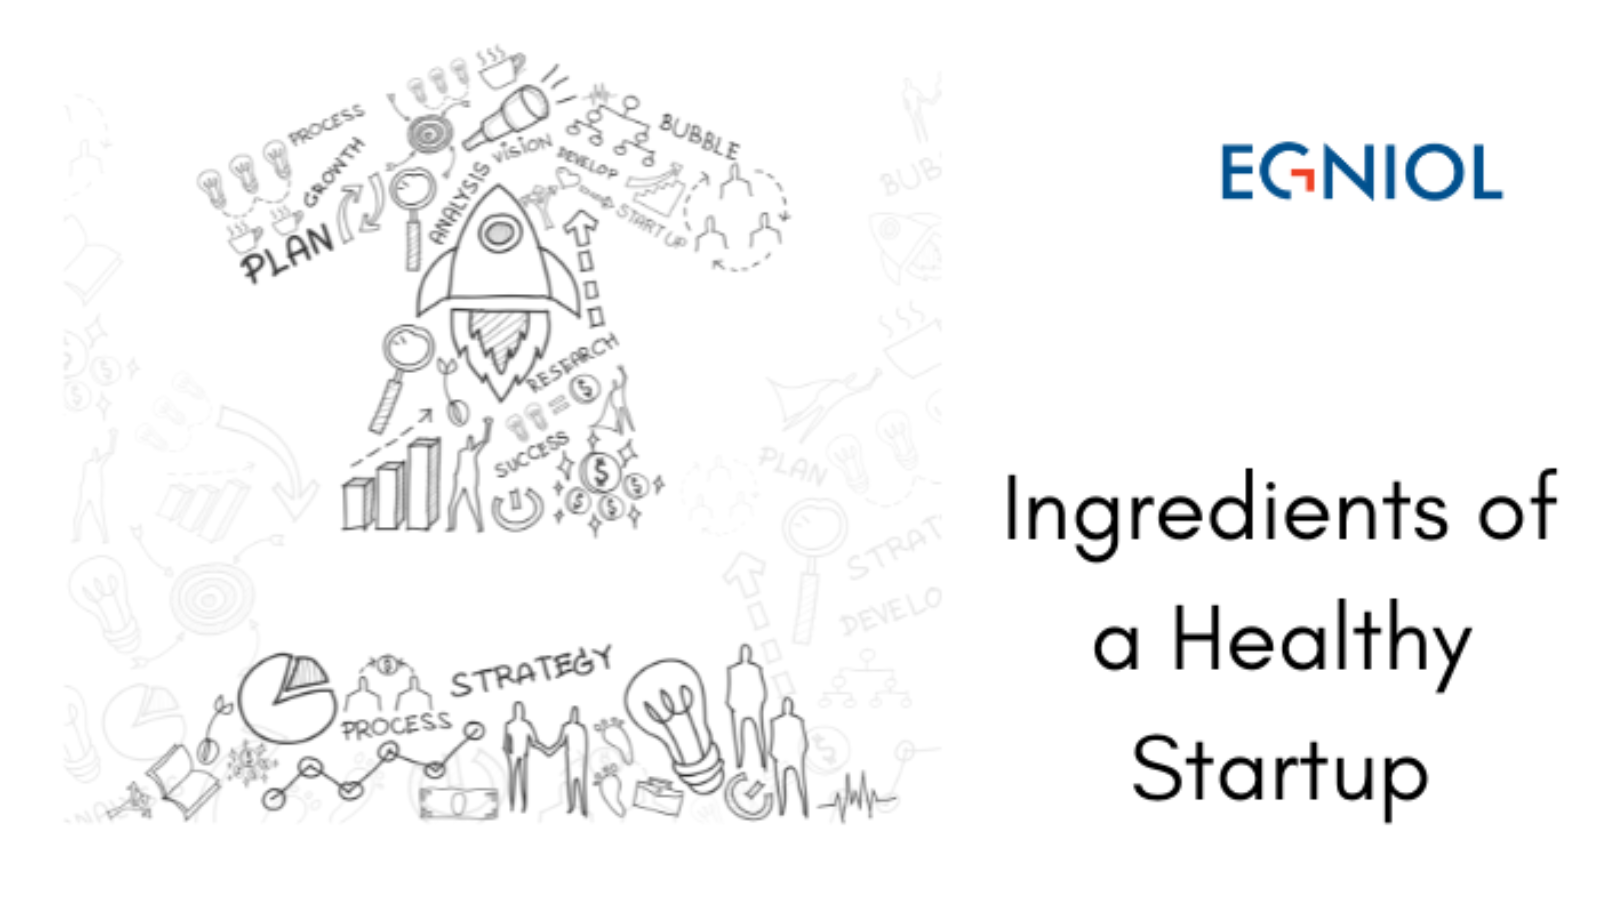 Ingredients of a Healthy Startup - By Egniol